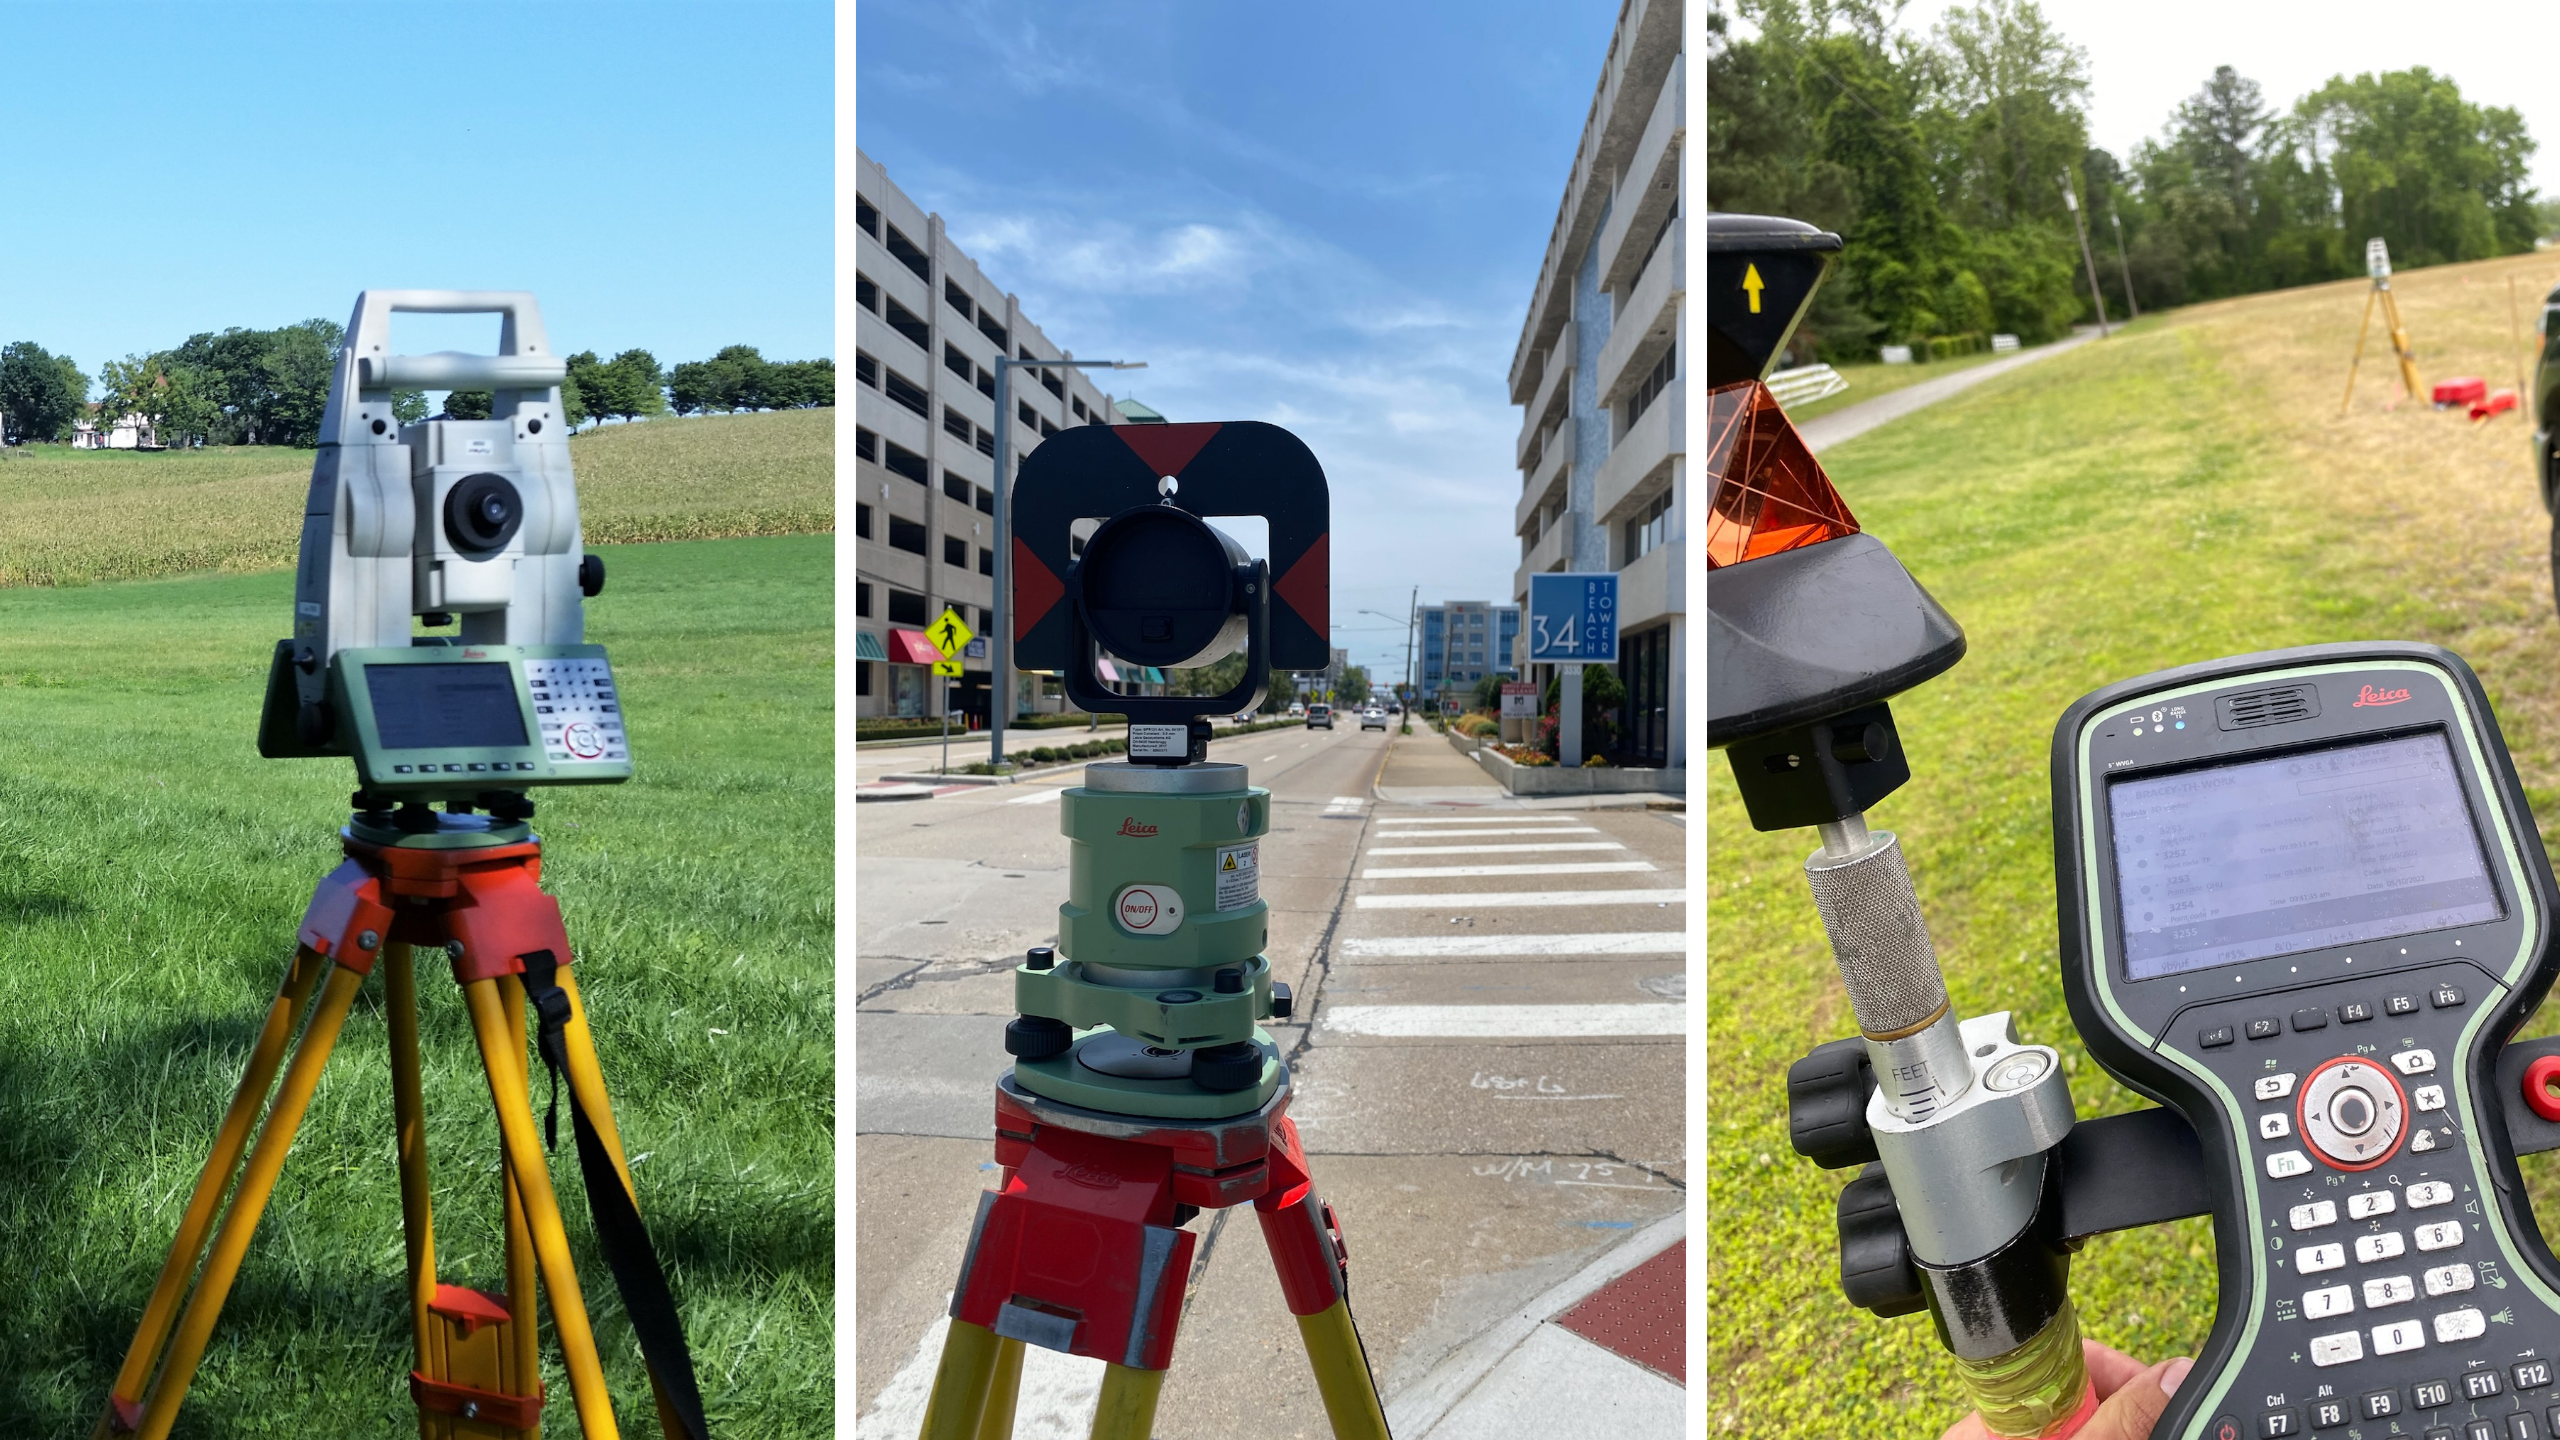 A collection of surveying instruments like a total station, a prism, and  GPS receiver.